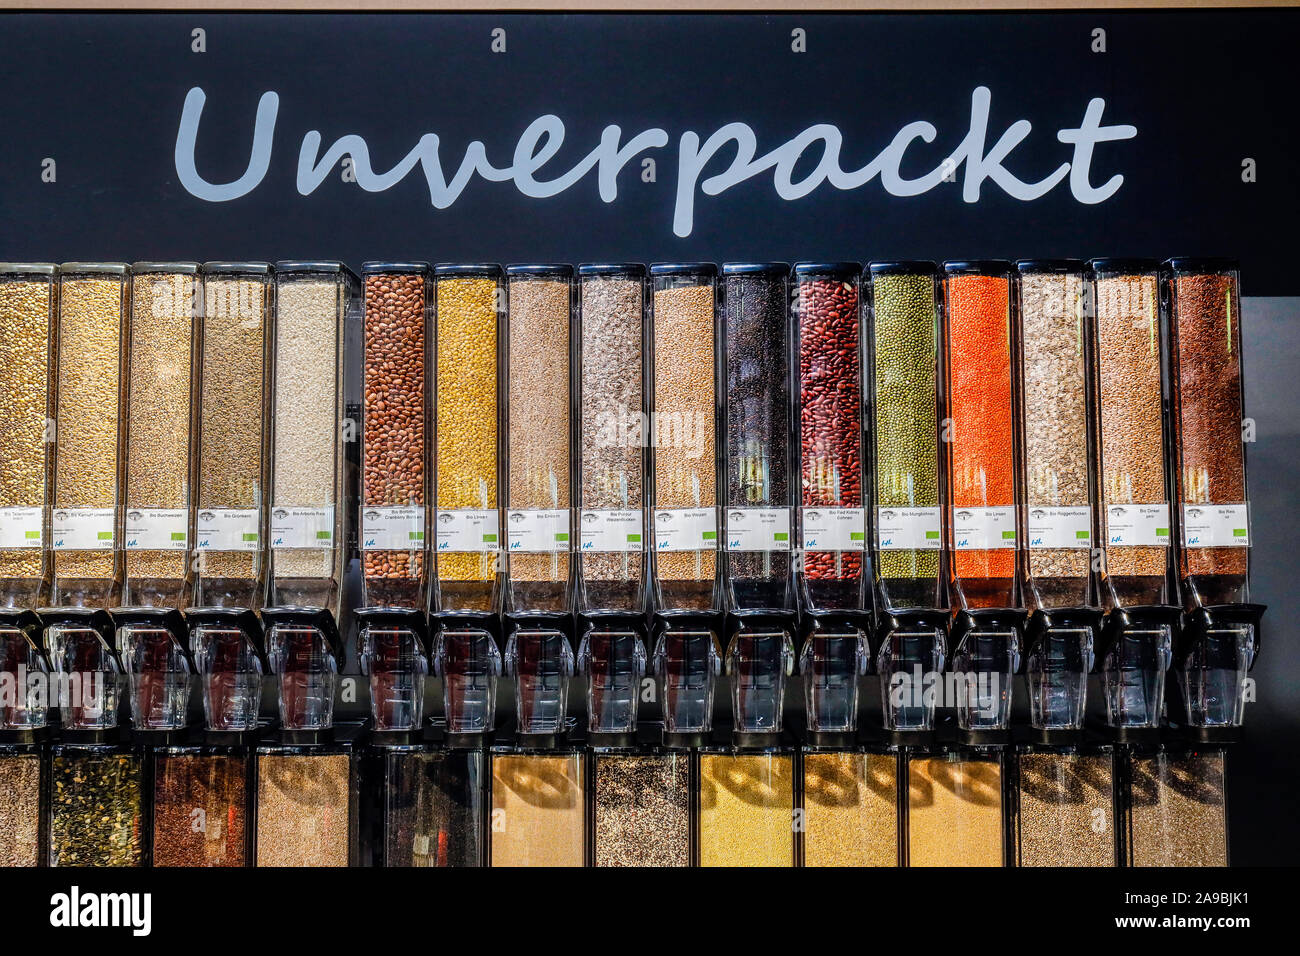 09.10.2019, Cologne, North Rhine-Westphalia, Germany - Unwrapped food at the Unverpackt stand at the Organic Market at the ANUGA Food Fair. 00X191009D Stock Photo